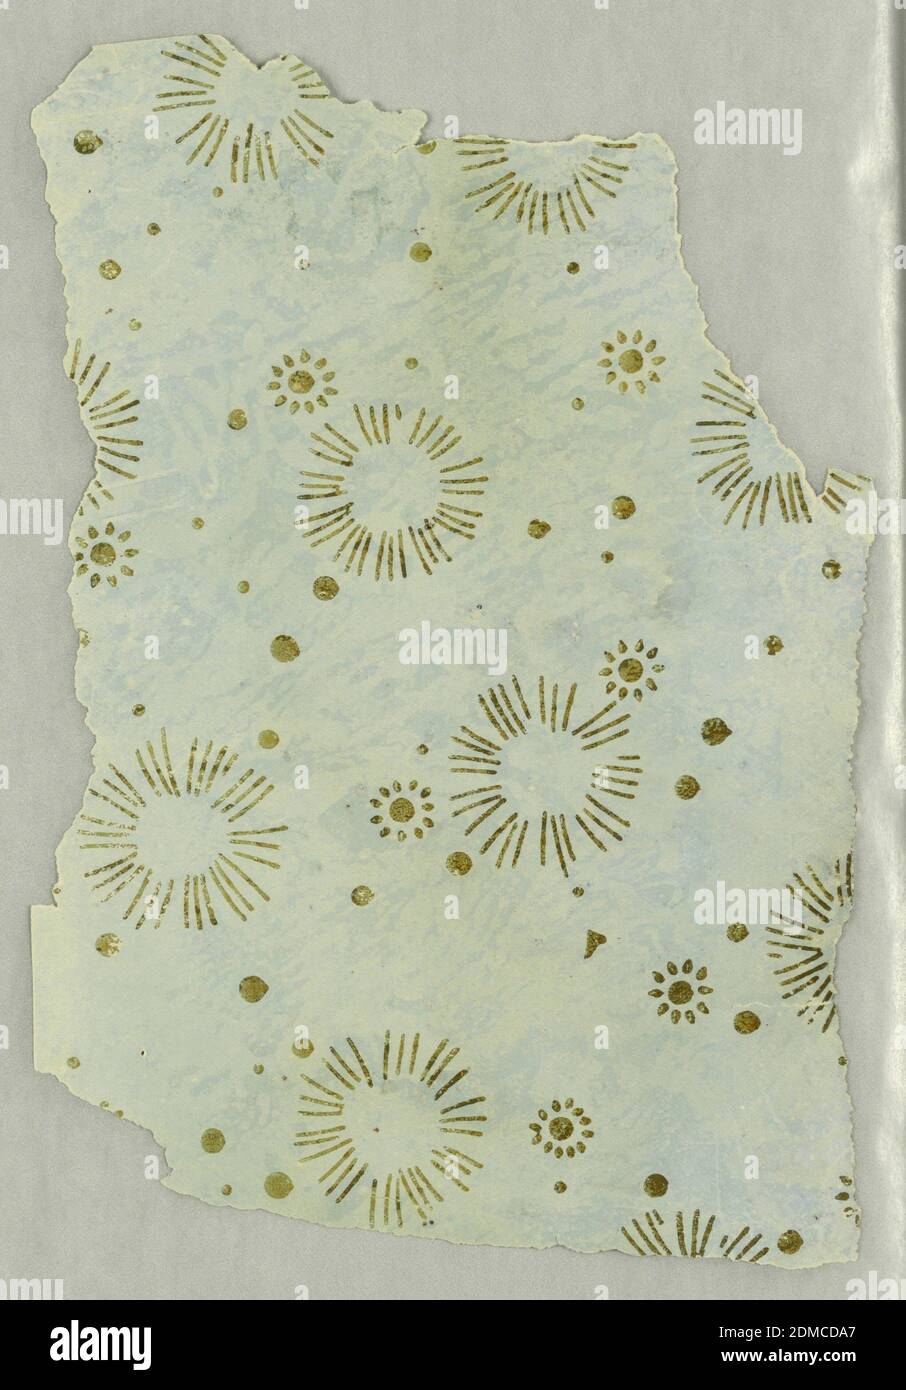 Ceiling paper, Machine-printed, Starburst or dandelion-like flowers with smaller floral-like motifs and dots. Printed in metallic gold on light blue ground., 1868–69, Wallcoverings, Ceiling paper Stock Photo